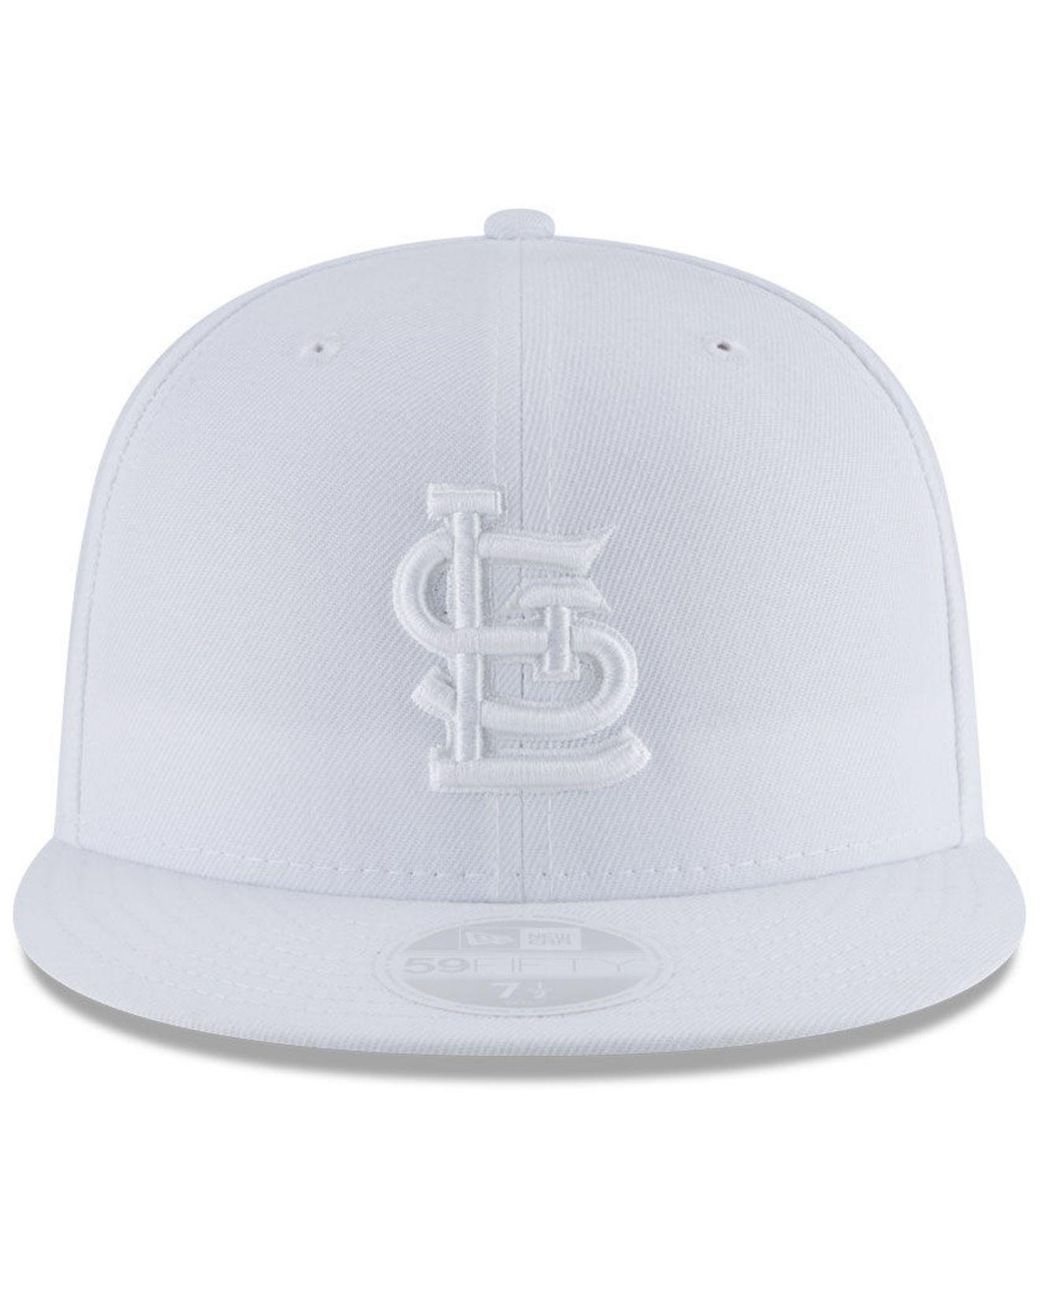 St. Louis Cardinals Throwback White 59FIFTY Fitted Hat – New Era Cap